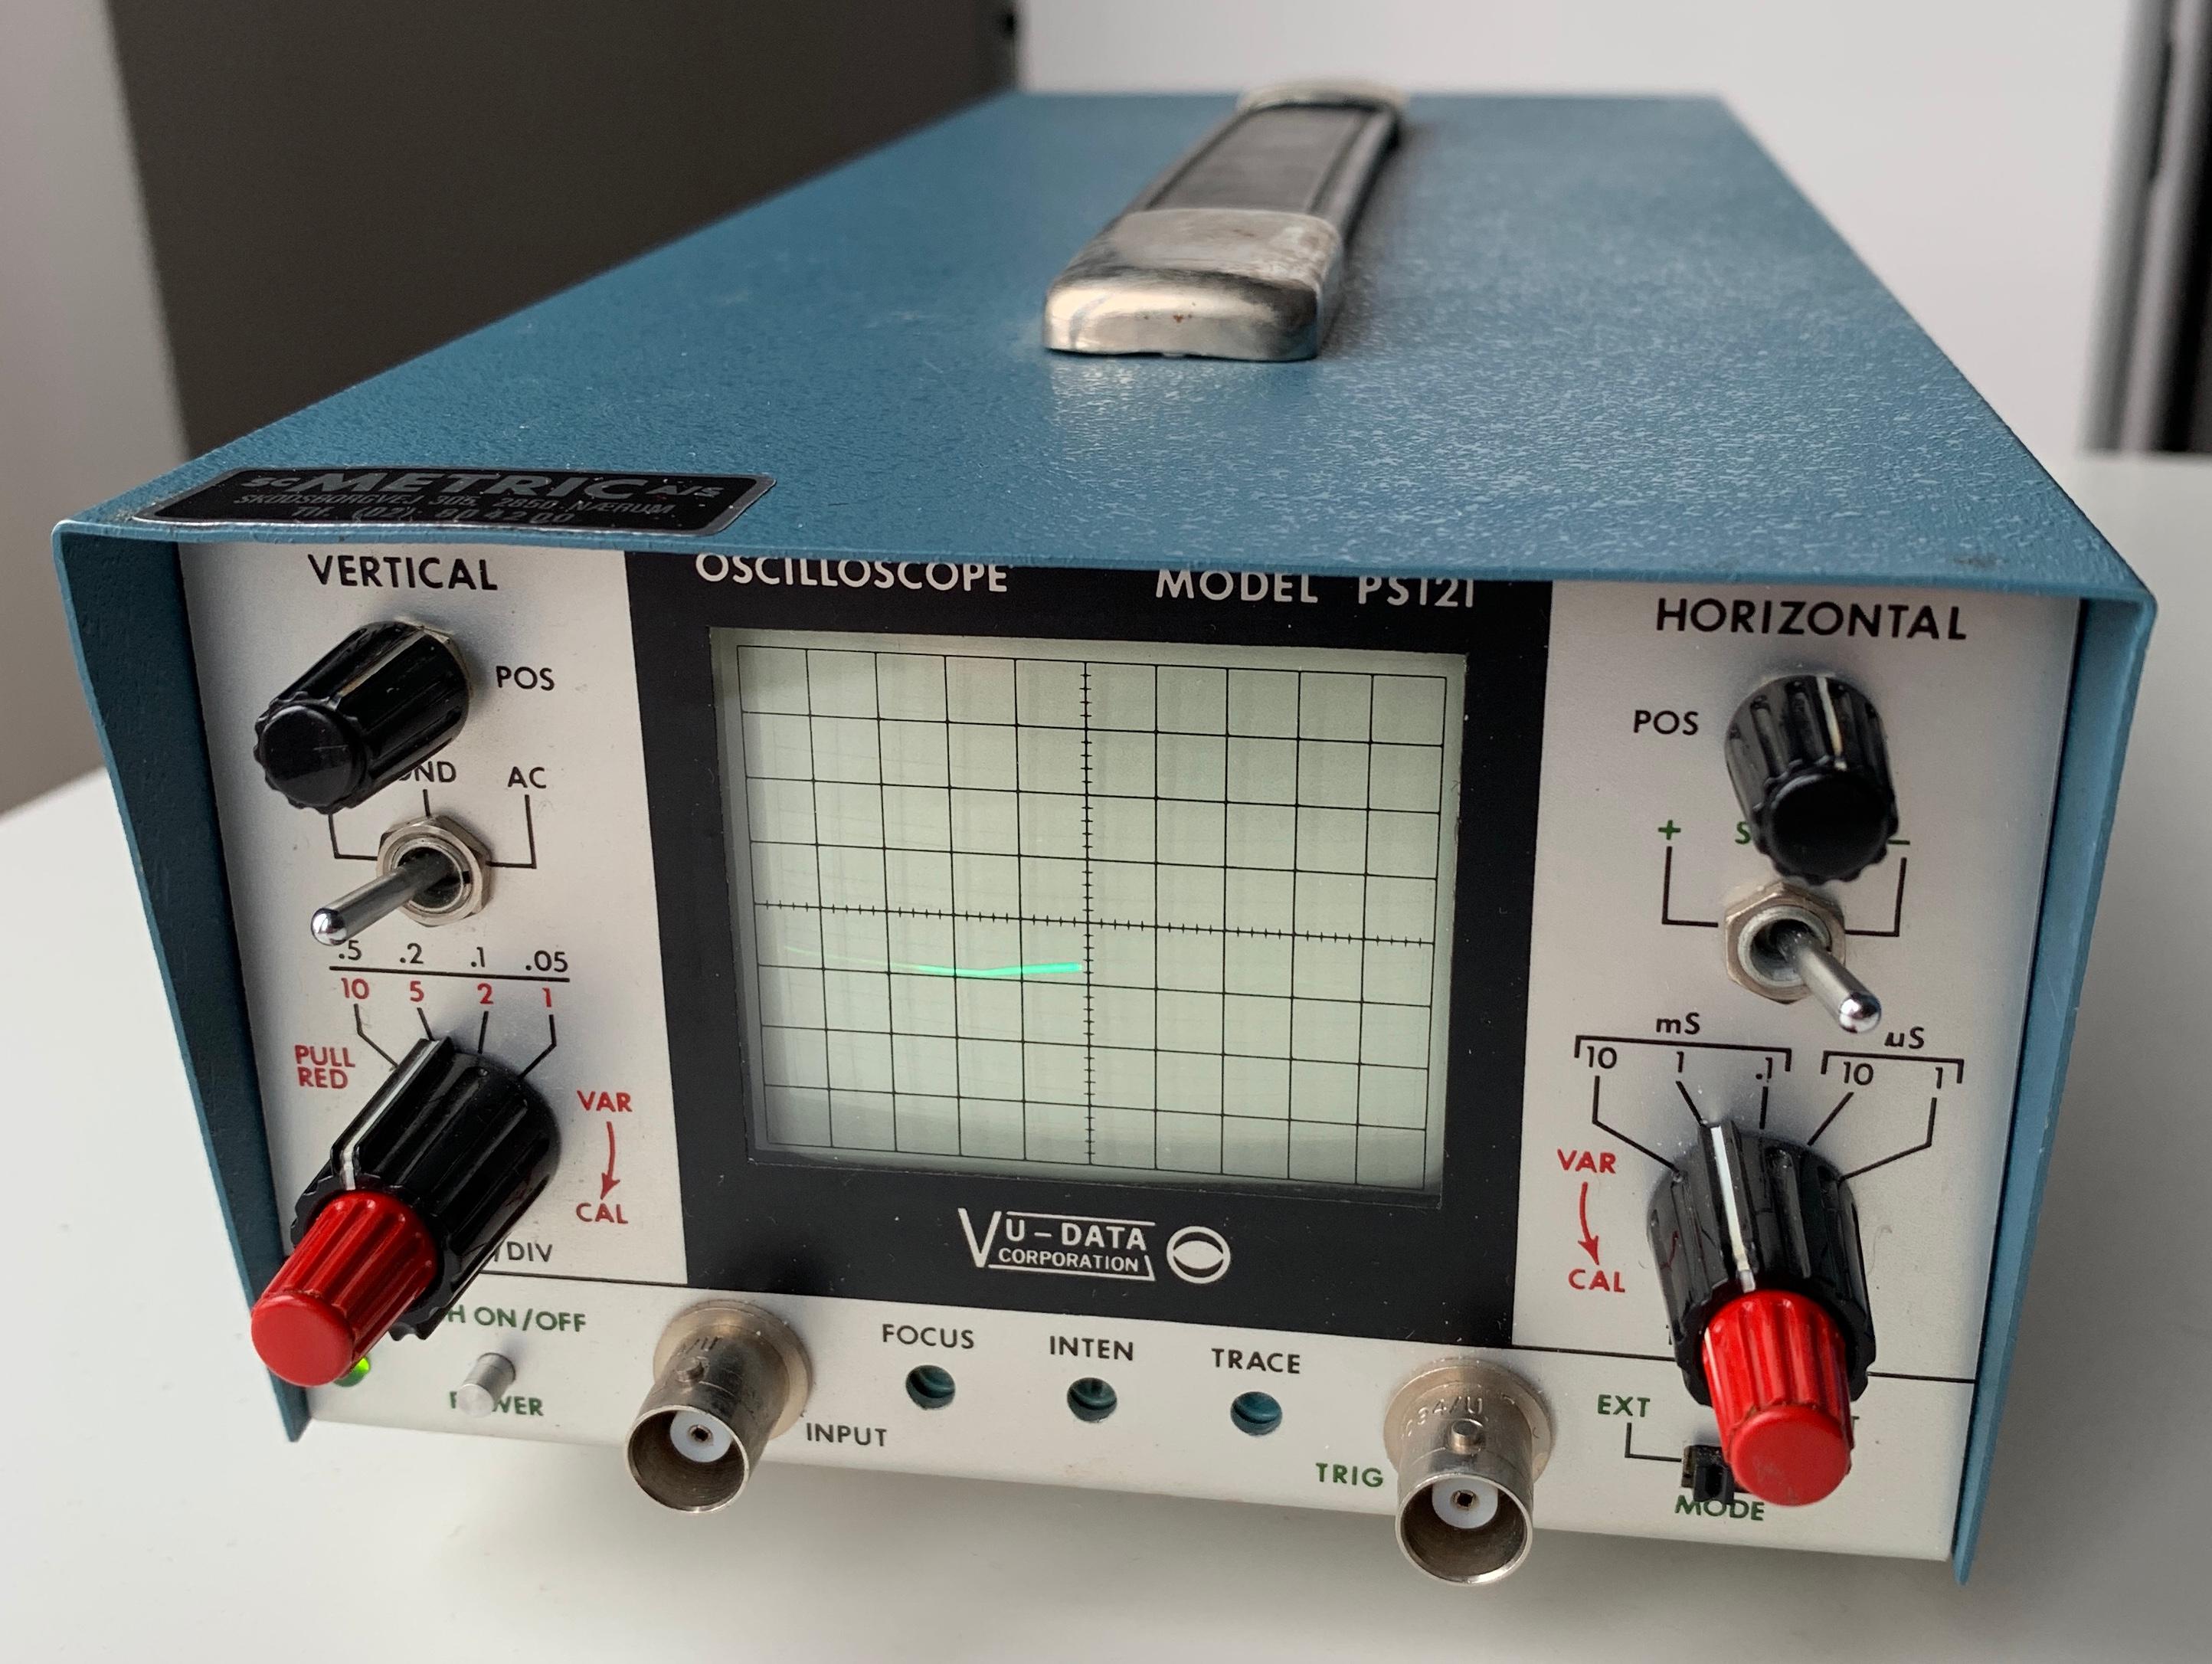 VU DATA Corporation Series PS121 Mini-Portable Oscilloscope. Amercian manufactured 1977 Vintage Oscilloscope measure instrument. Boxed with manual and accessories. Note that this is made for the Danish market with 220 V. Working condition. Video